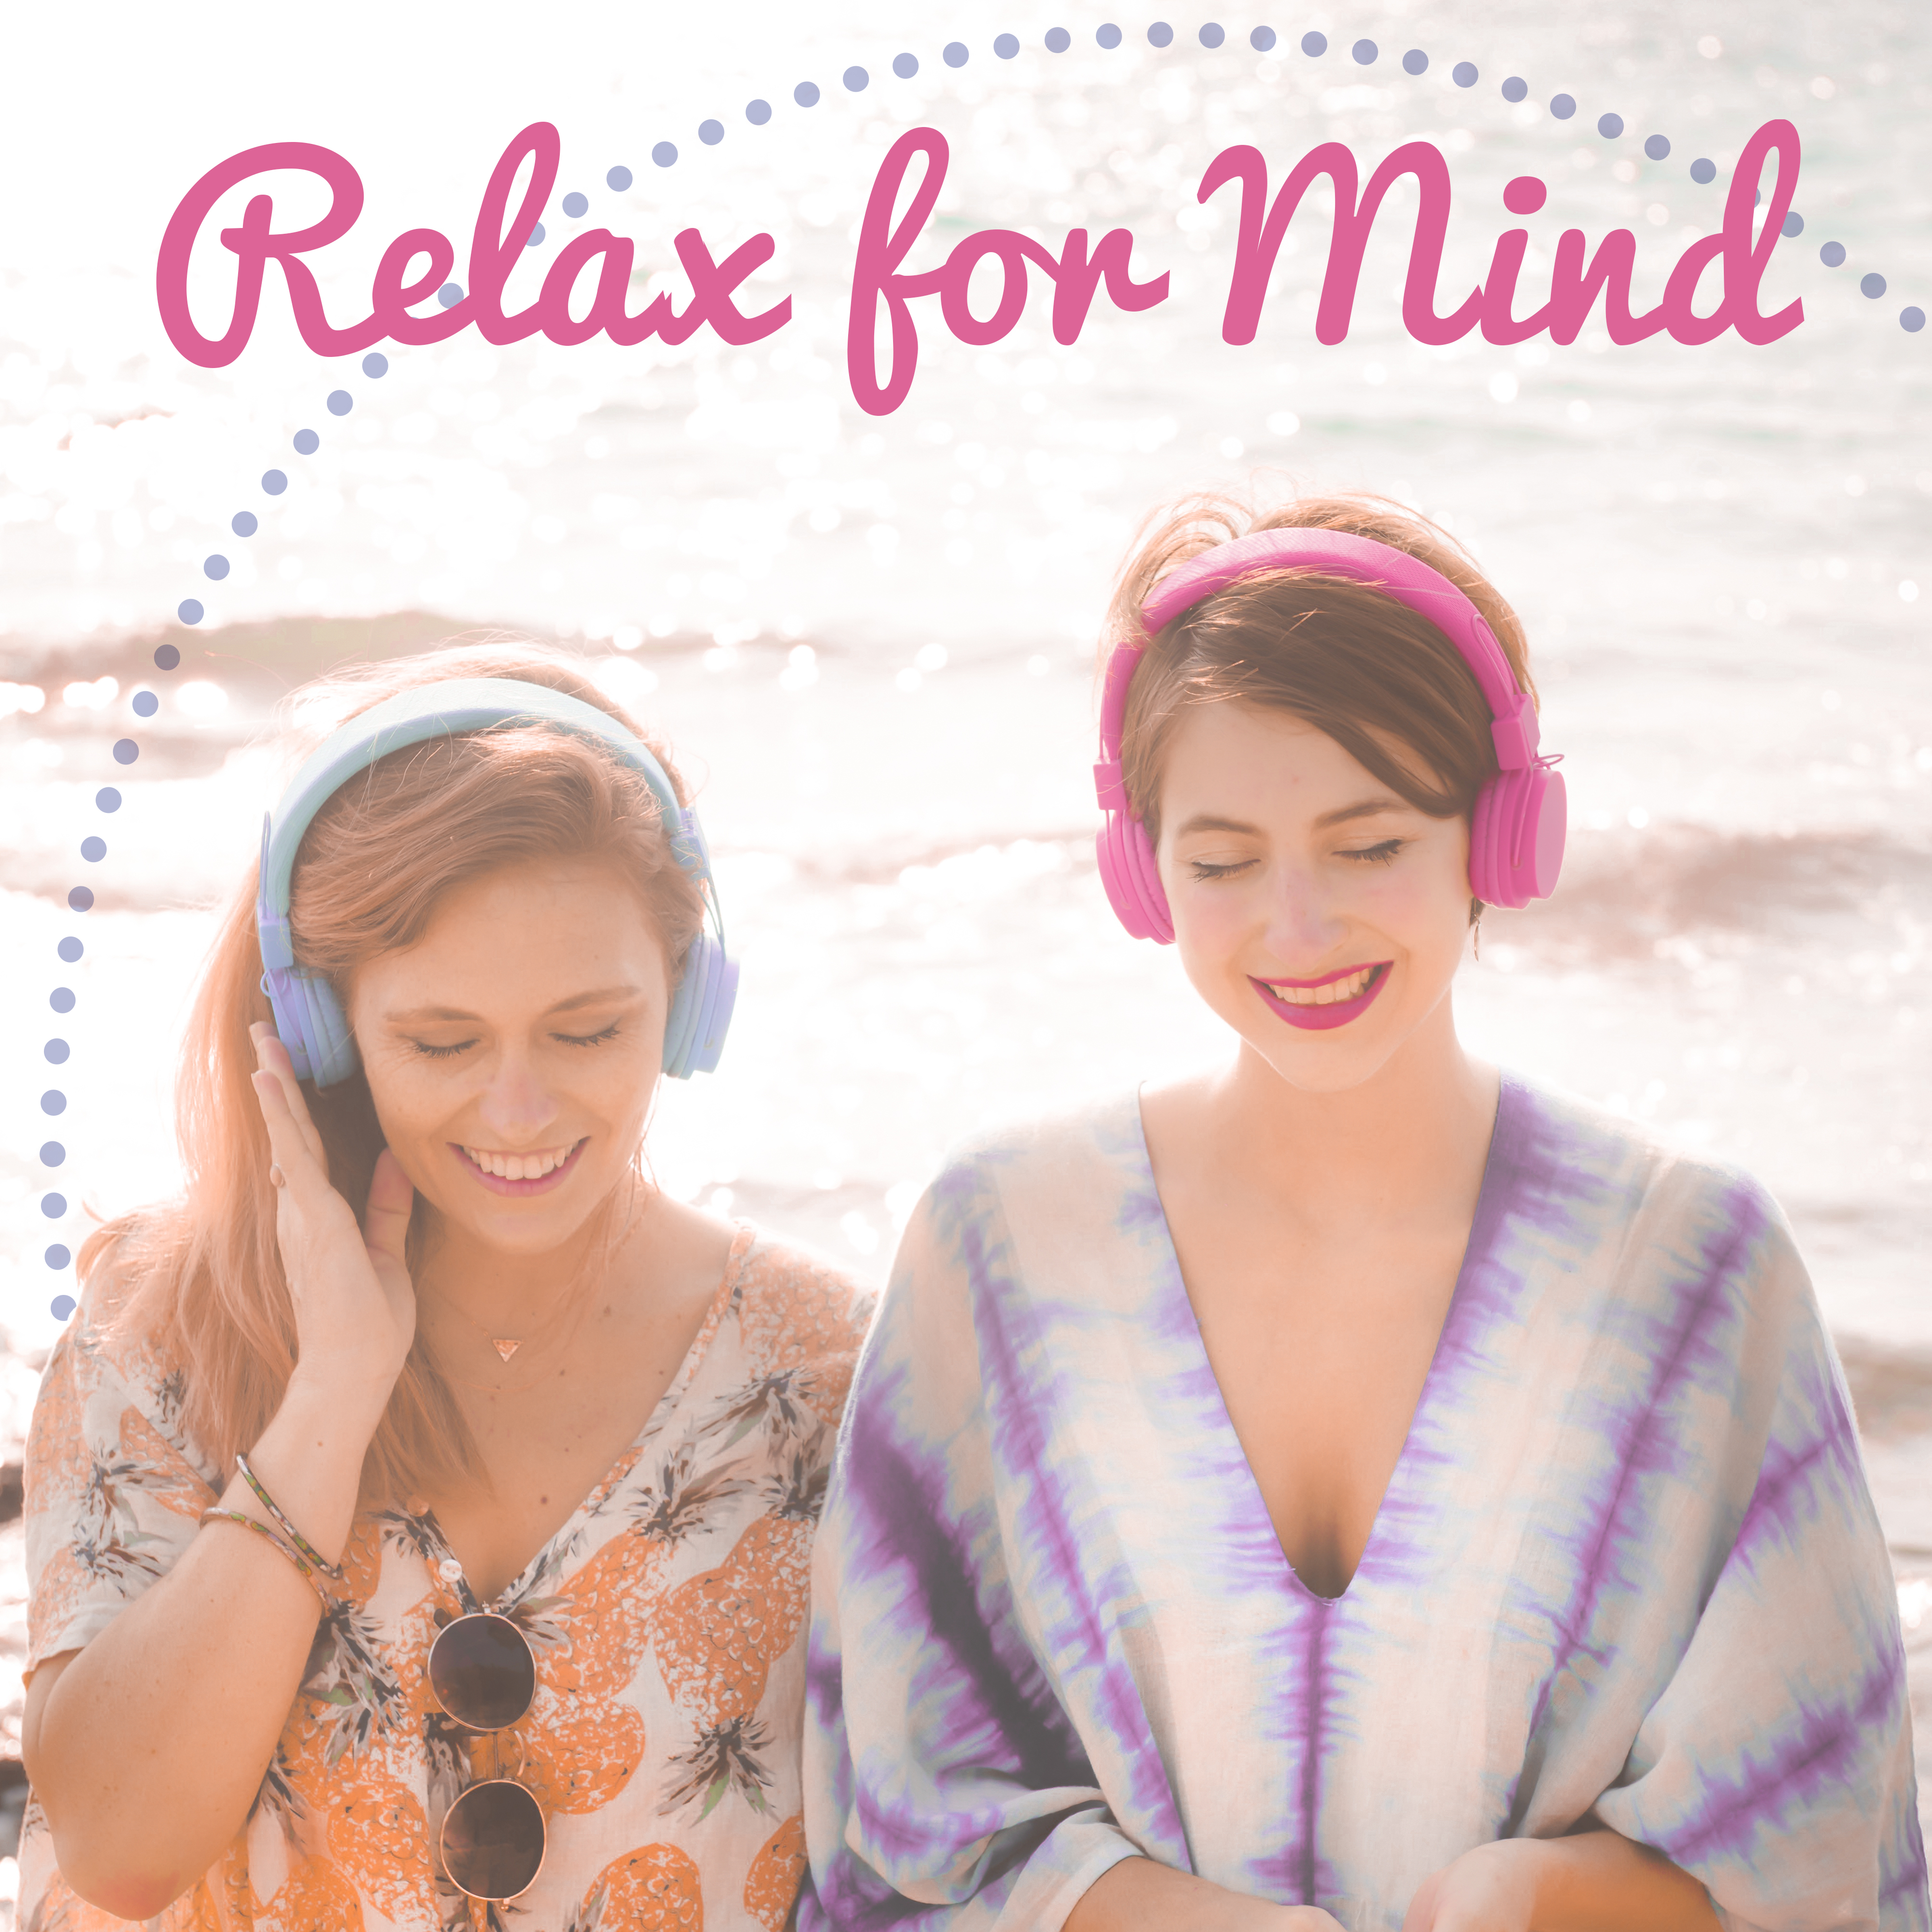 Relax for Mind  Peaceful Sounds to Calm Down, Deep Meditation, Contemplation of Nature, Pure Mind, Soft New Age Music, Nature Sounds to Rest